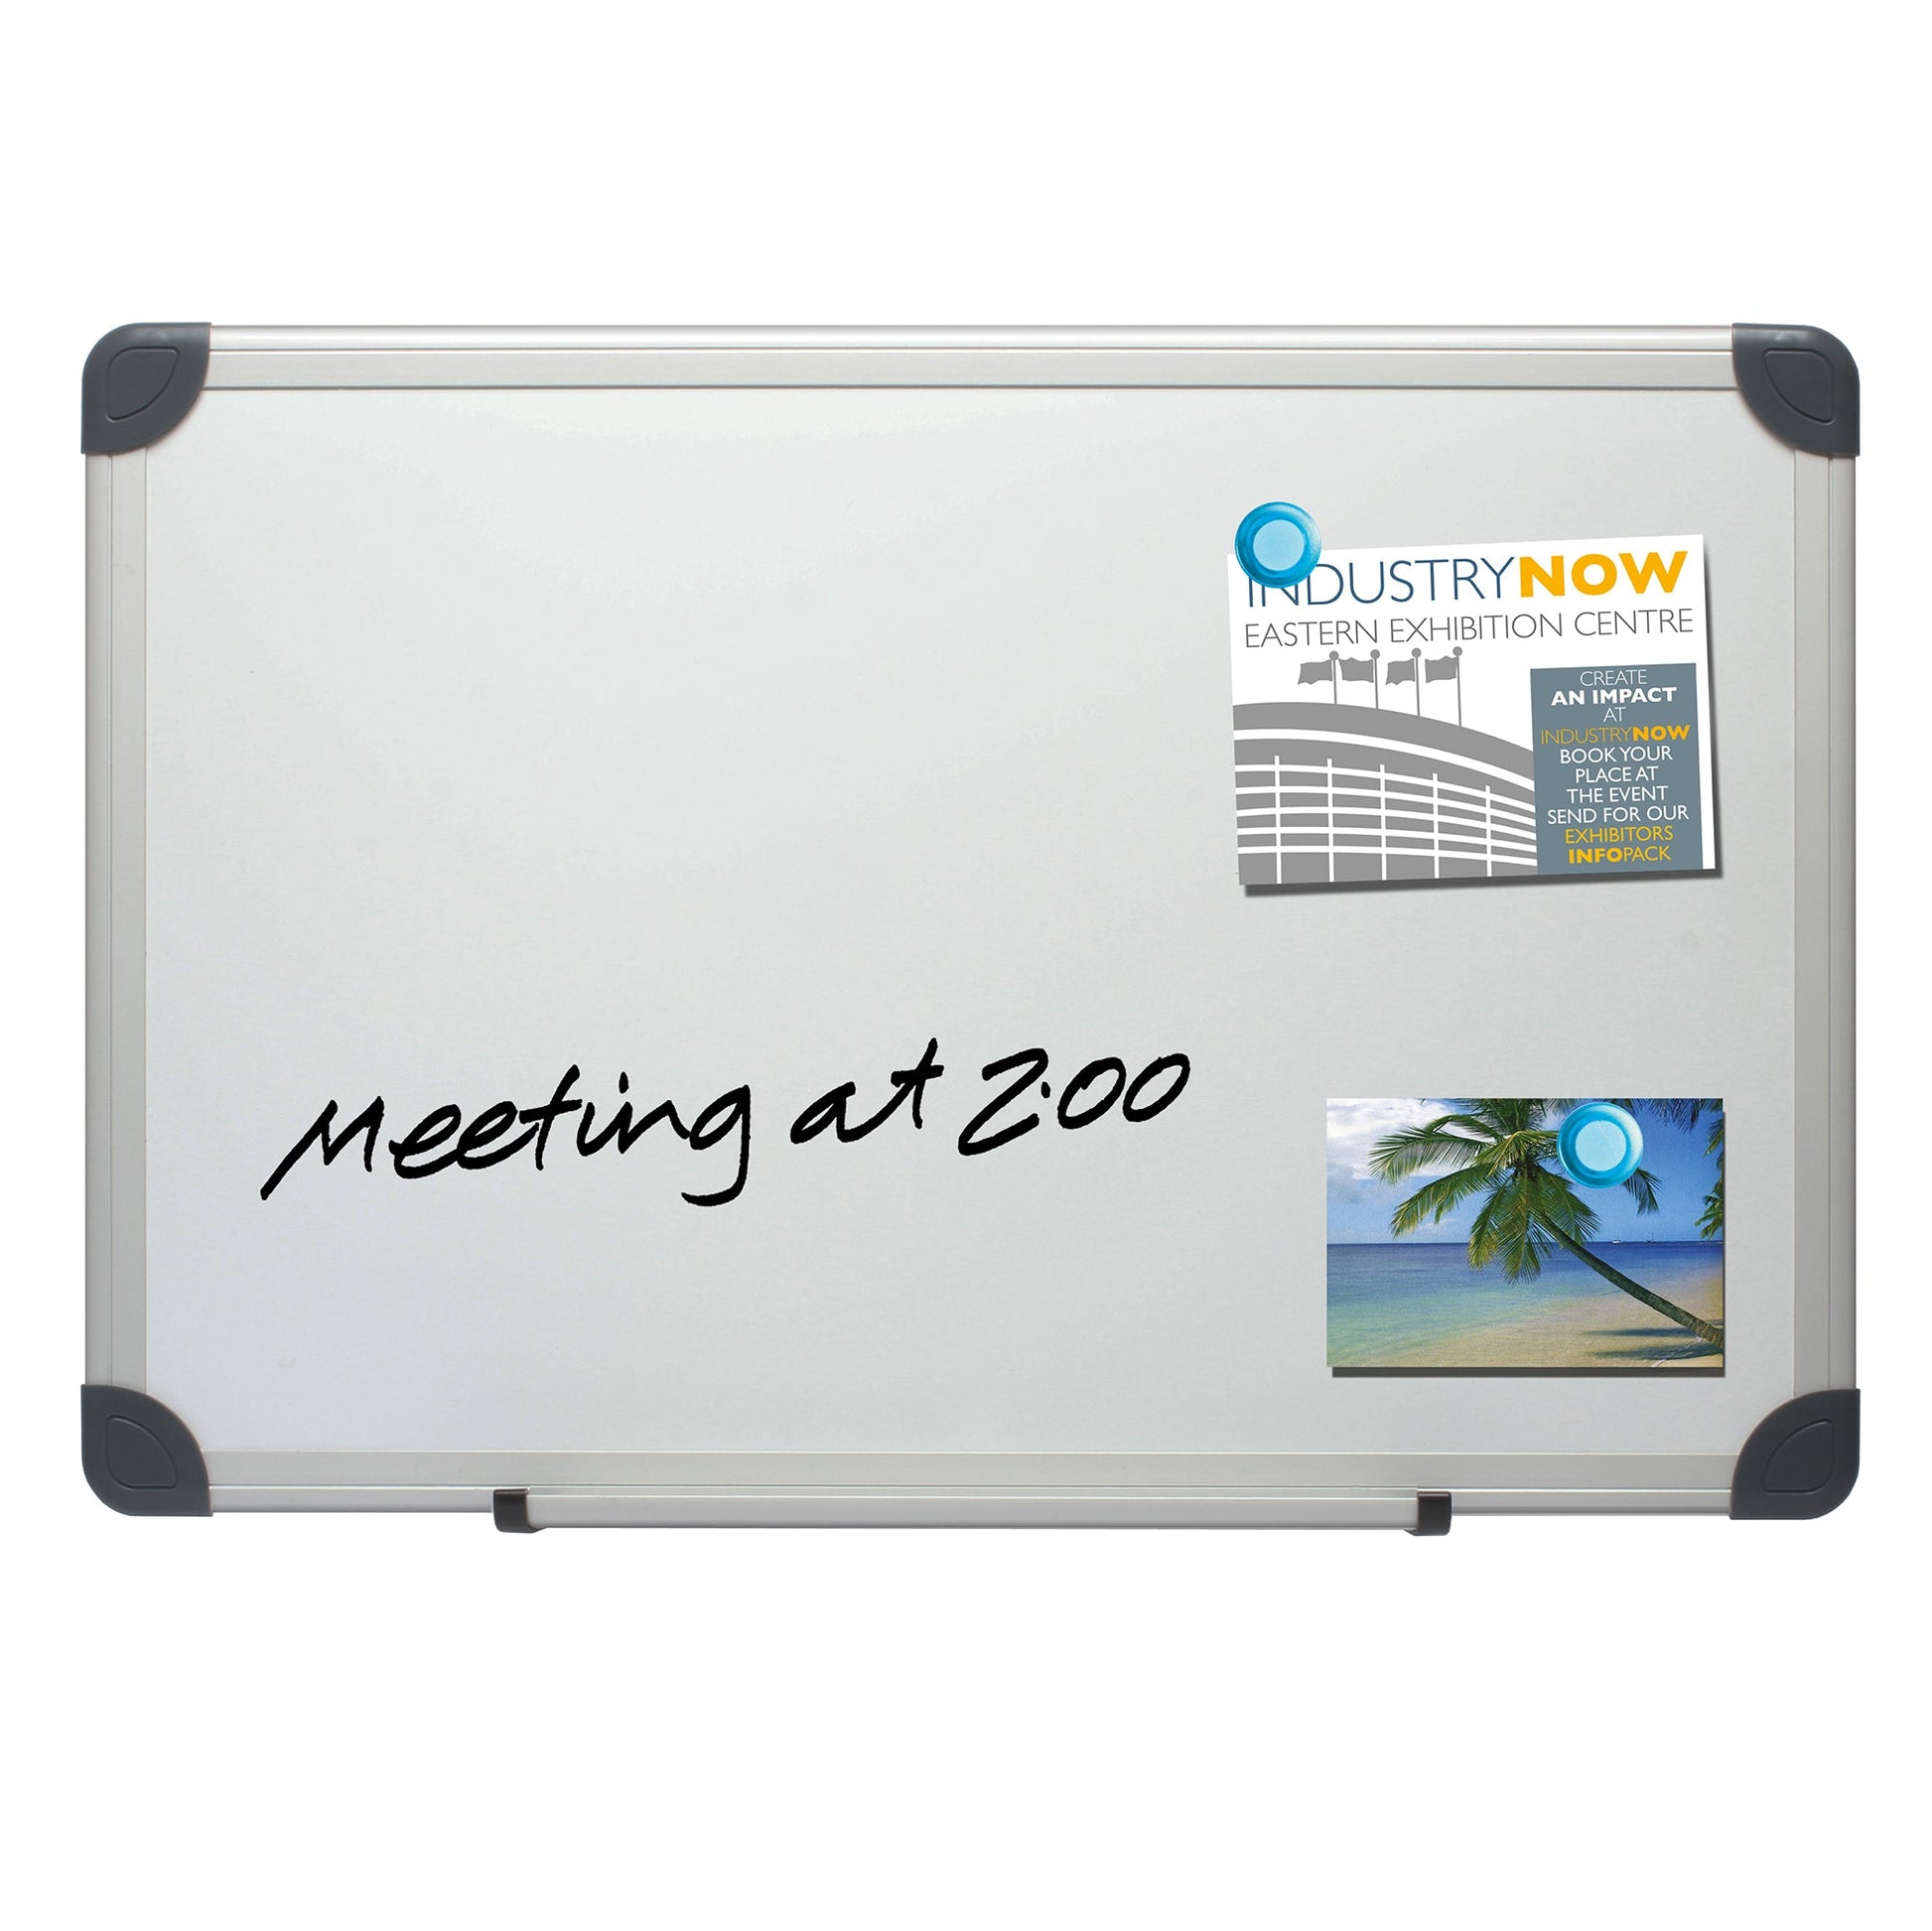 The image displays a magnetic whiteboard framed with an aluminium edge and grey corner protectors. A handwritten note reads "meeting at 2:00," and affixed to the board is a promotional flyer, as well as a postcard, highlighting the versatile uses of the whiteboard. The whiteboard also features a pen tray, suitable for holding markers and erasers.